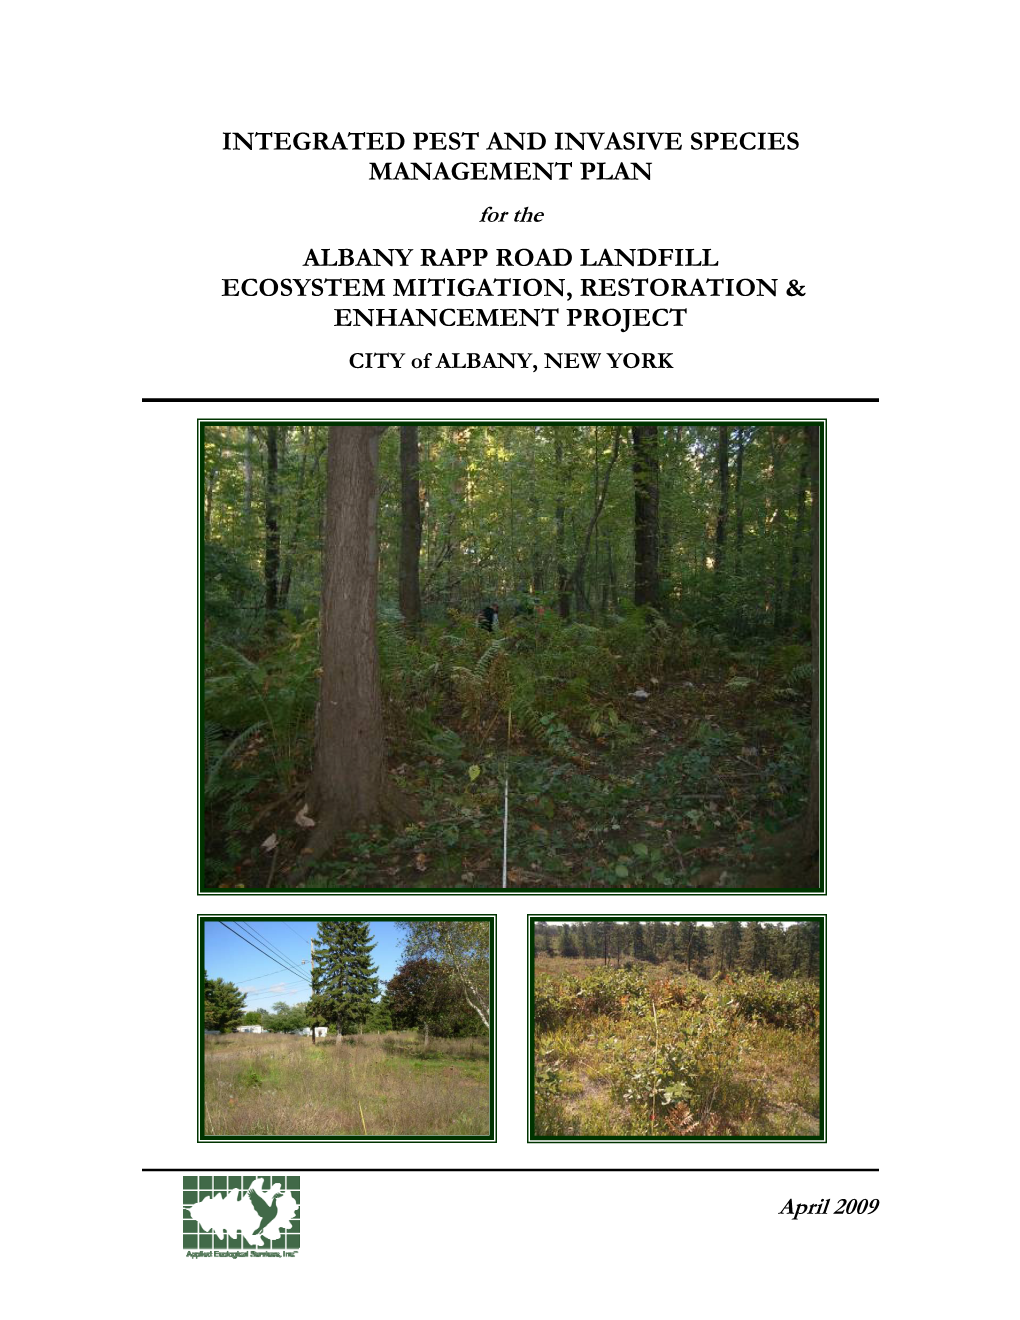 Integrated Pest and Invasive Species Management Plan